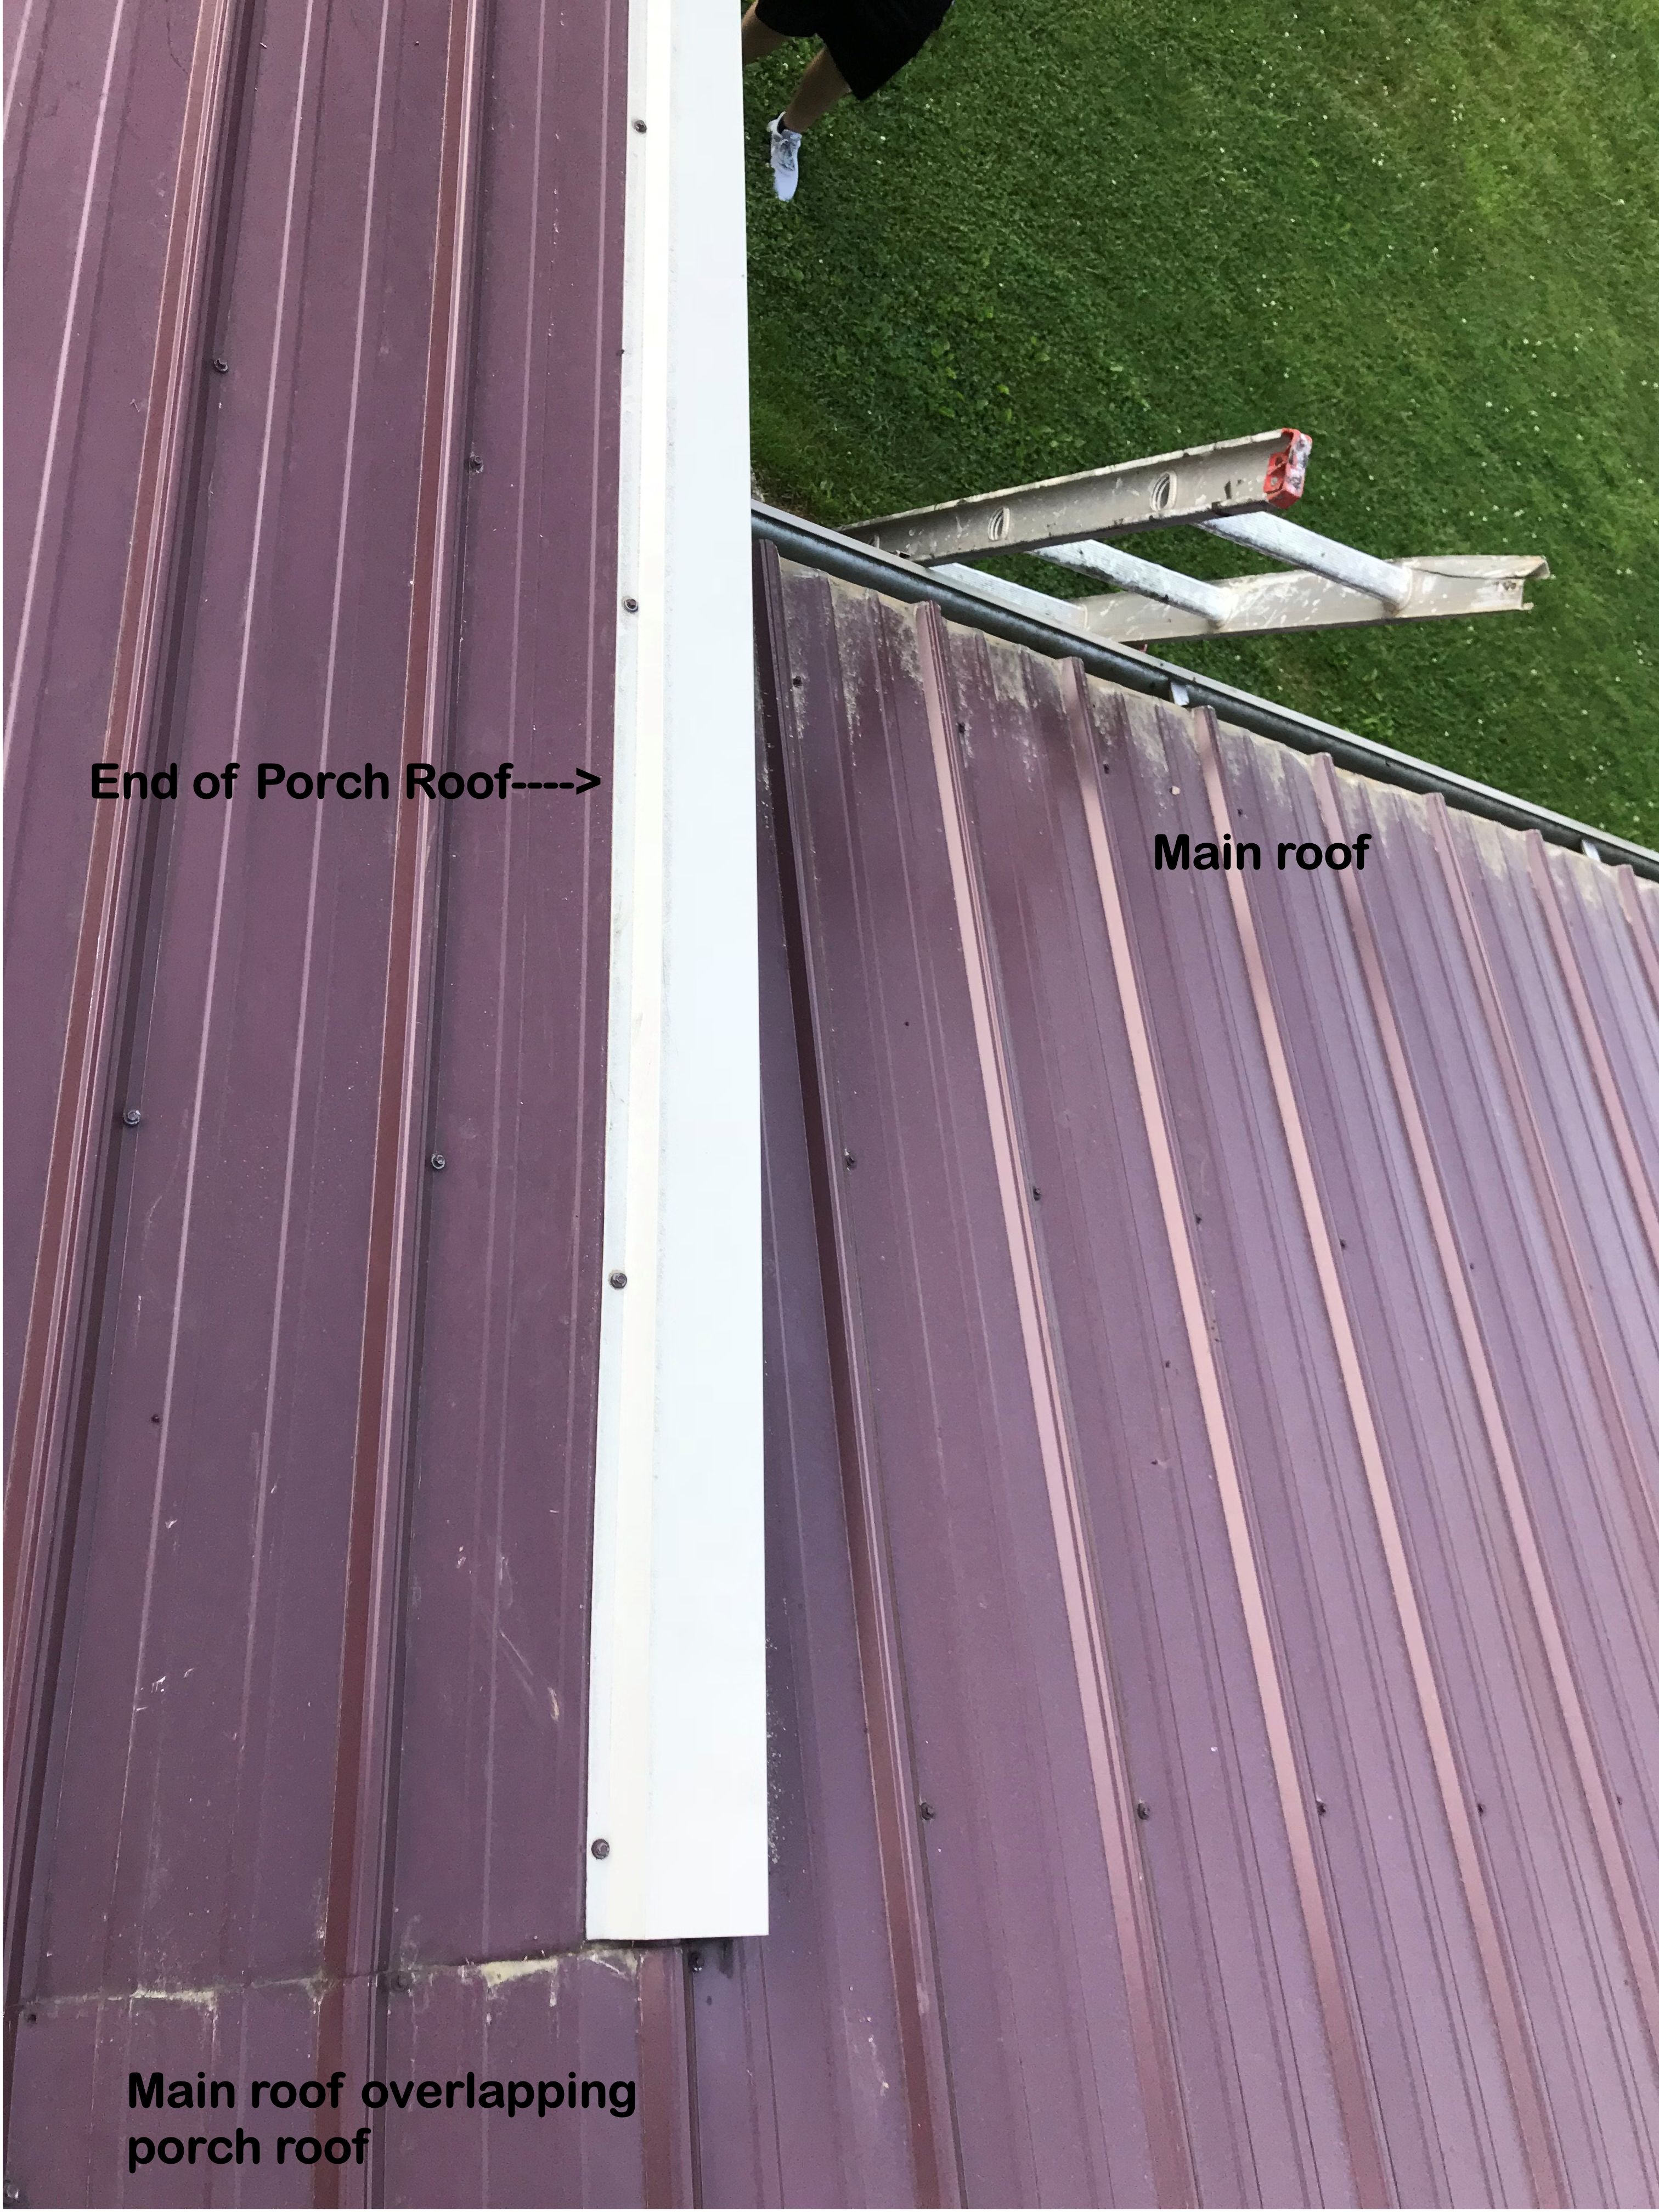 Roof Picture 2.jpg